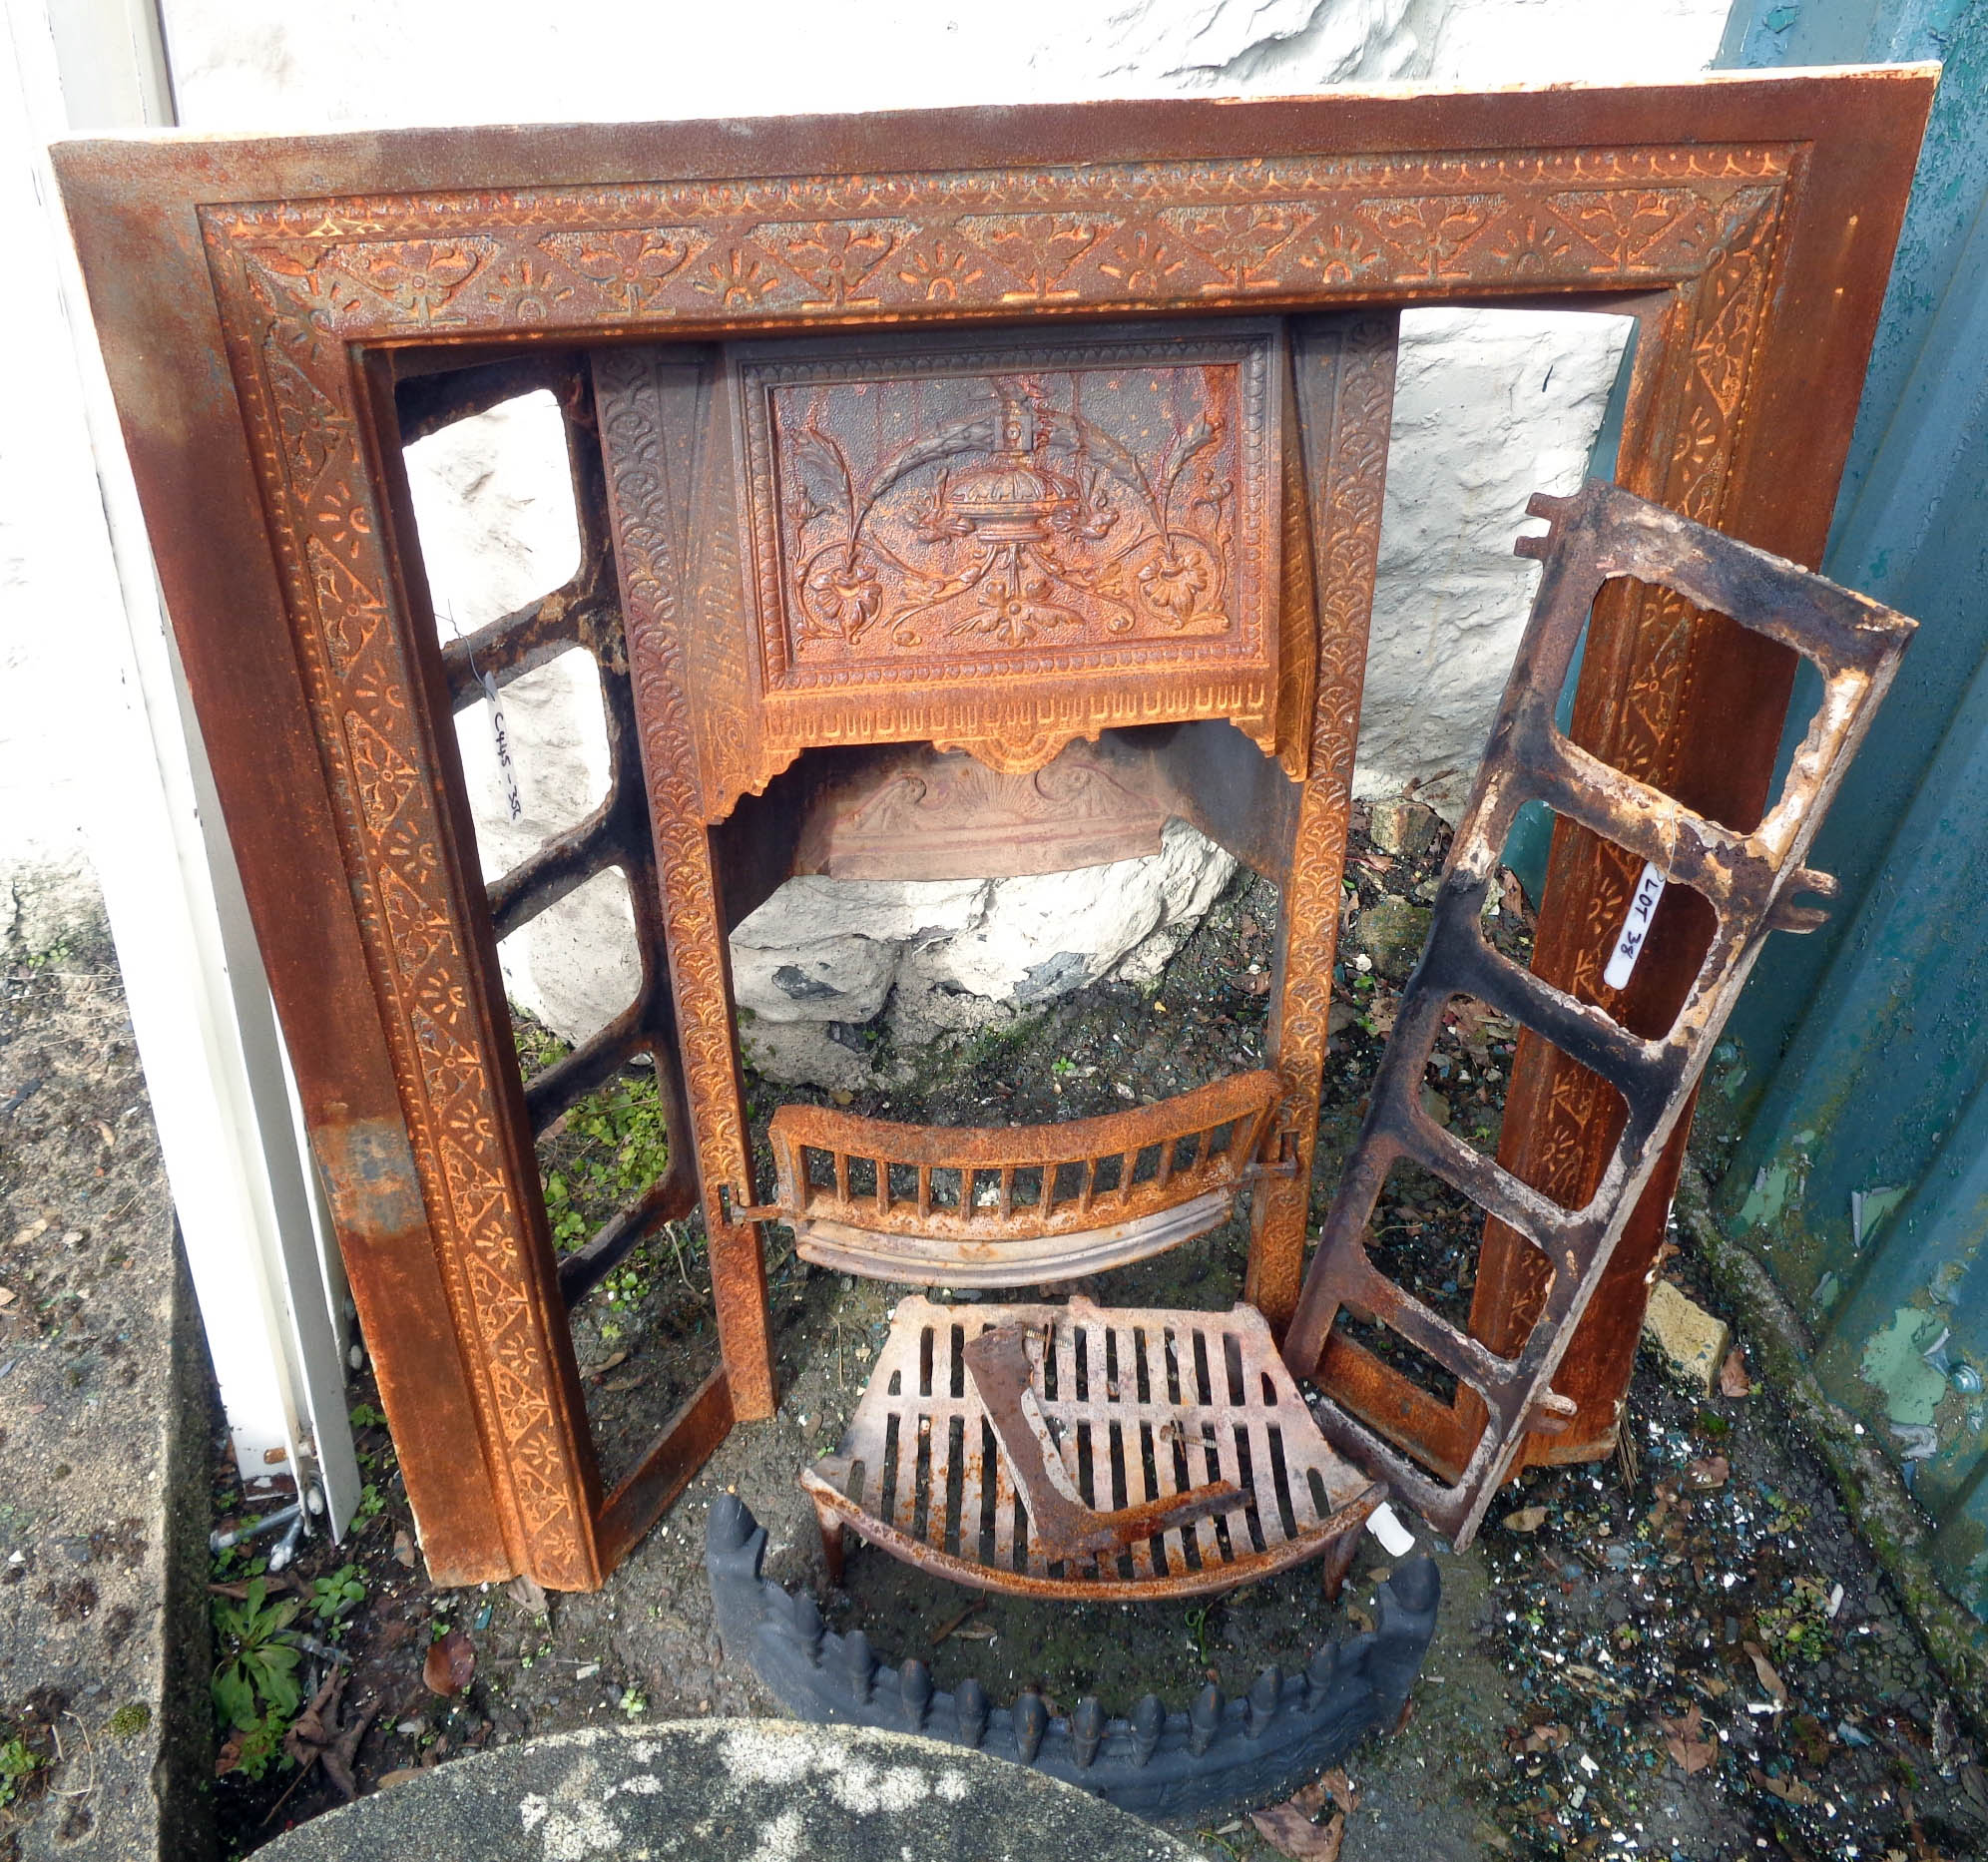 A cast iron fire place insert and grate